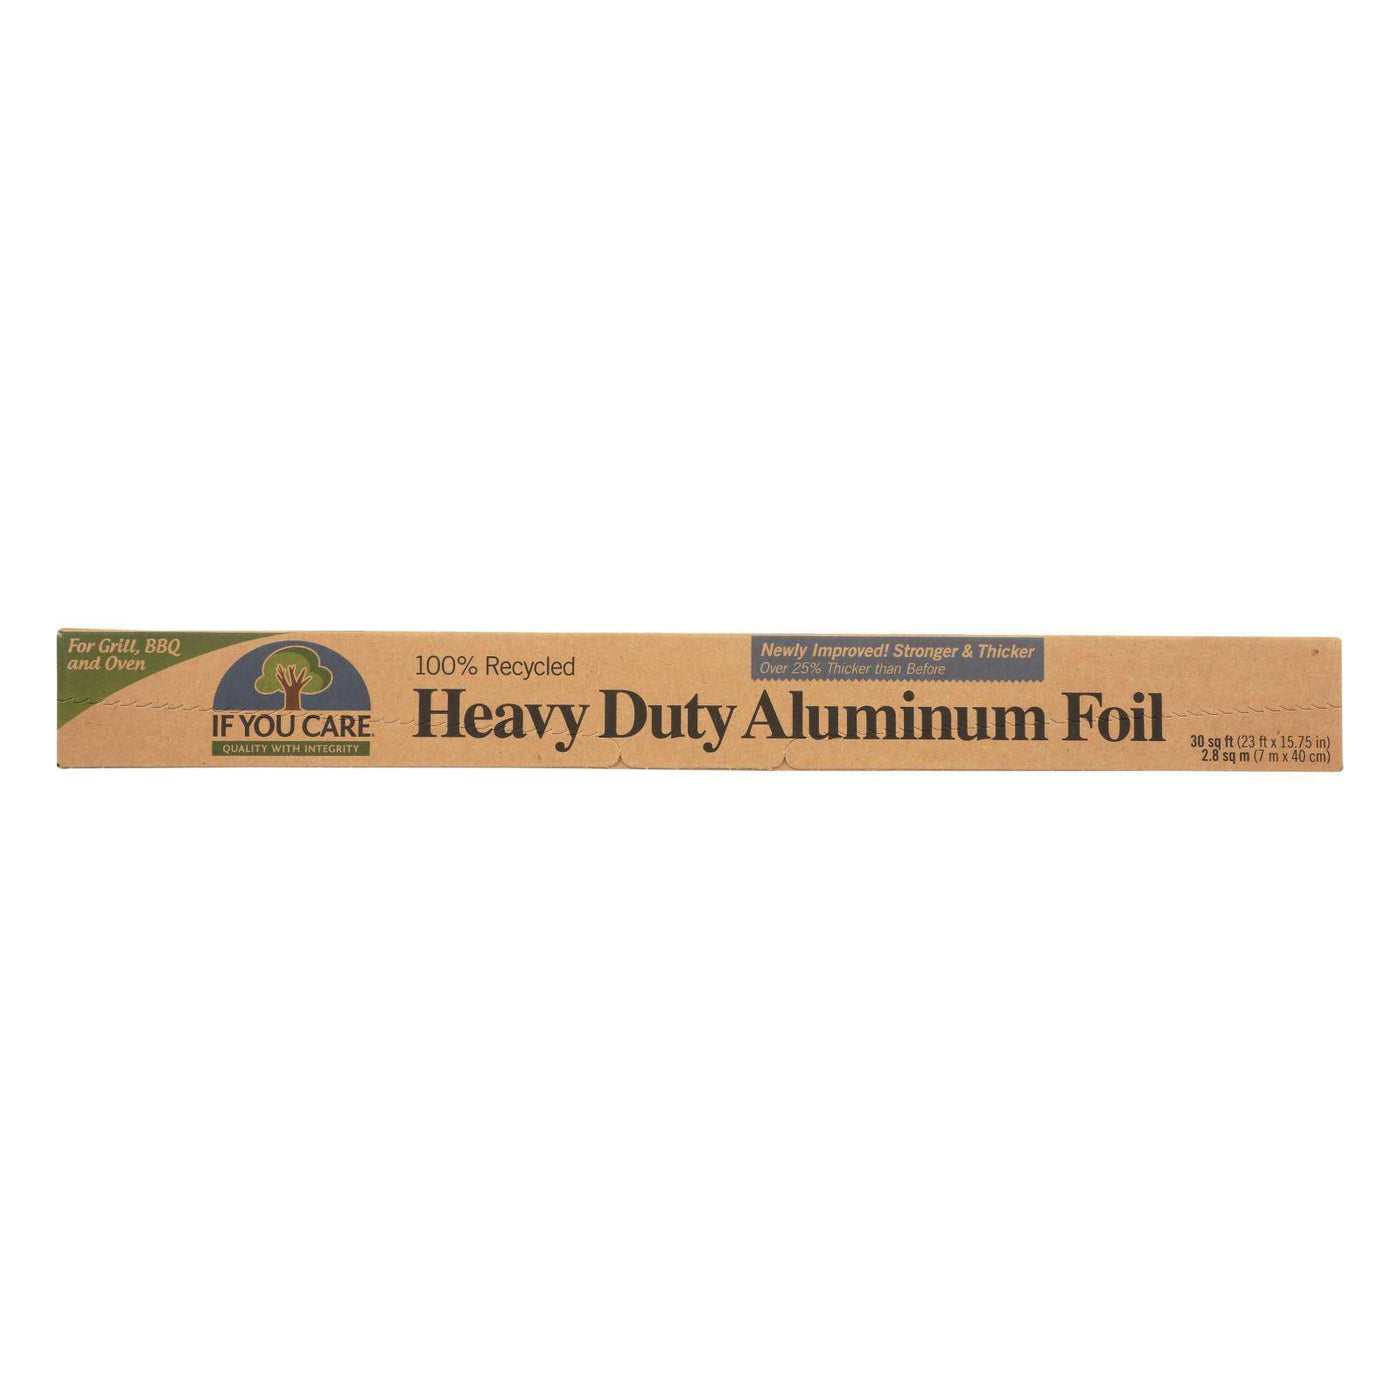 If You Care Aluminum Foil - Recycled - Case Of 12 - 30 Sq. Ft. | OnlyNaturals.us